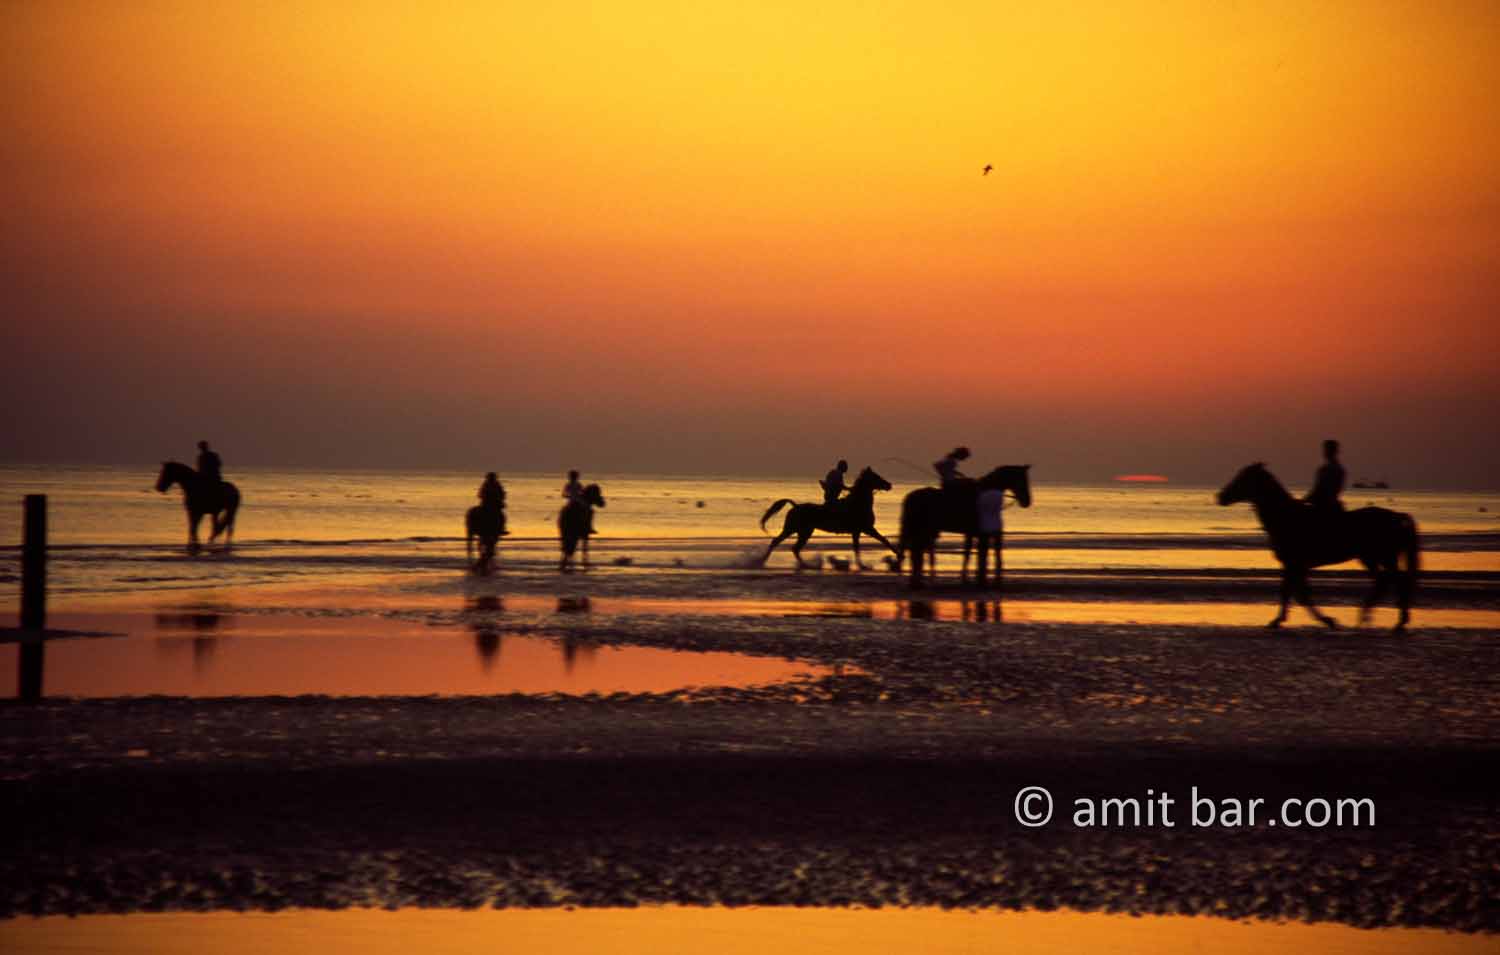 Horses at sunset I: Horses ride by the sea at sunet in Zeeland, The Netherlands